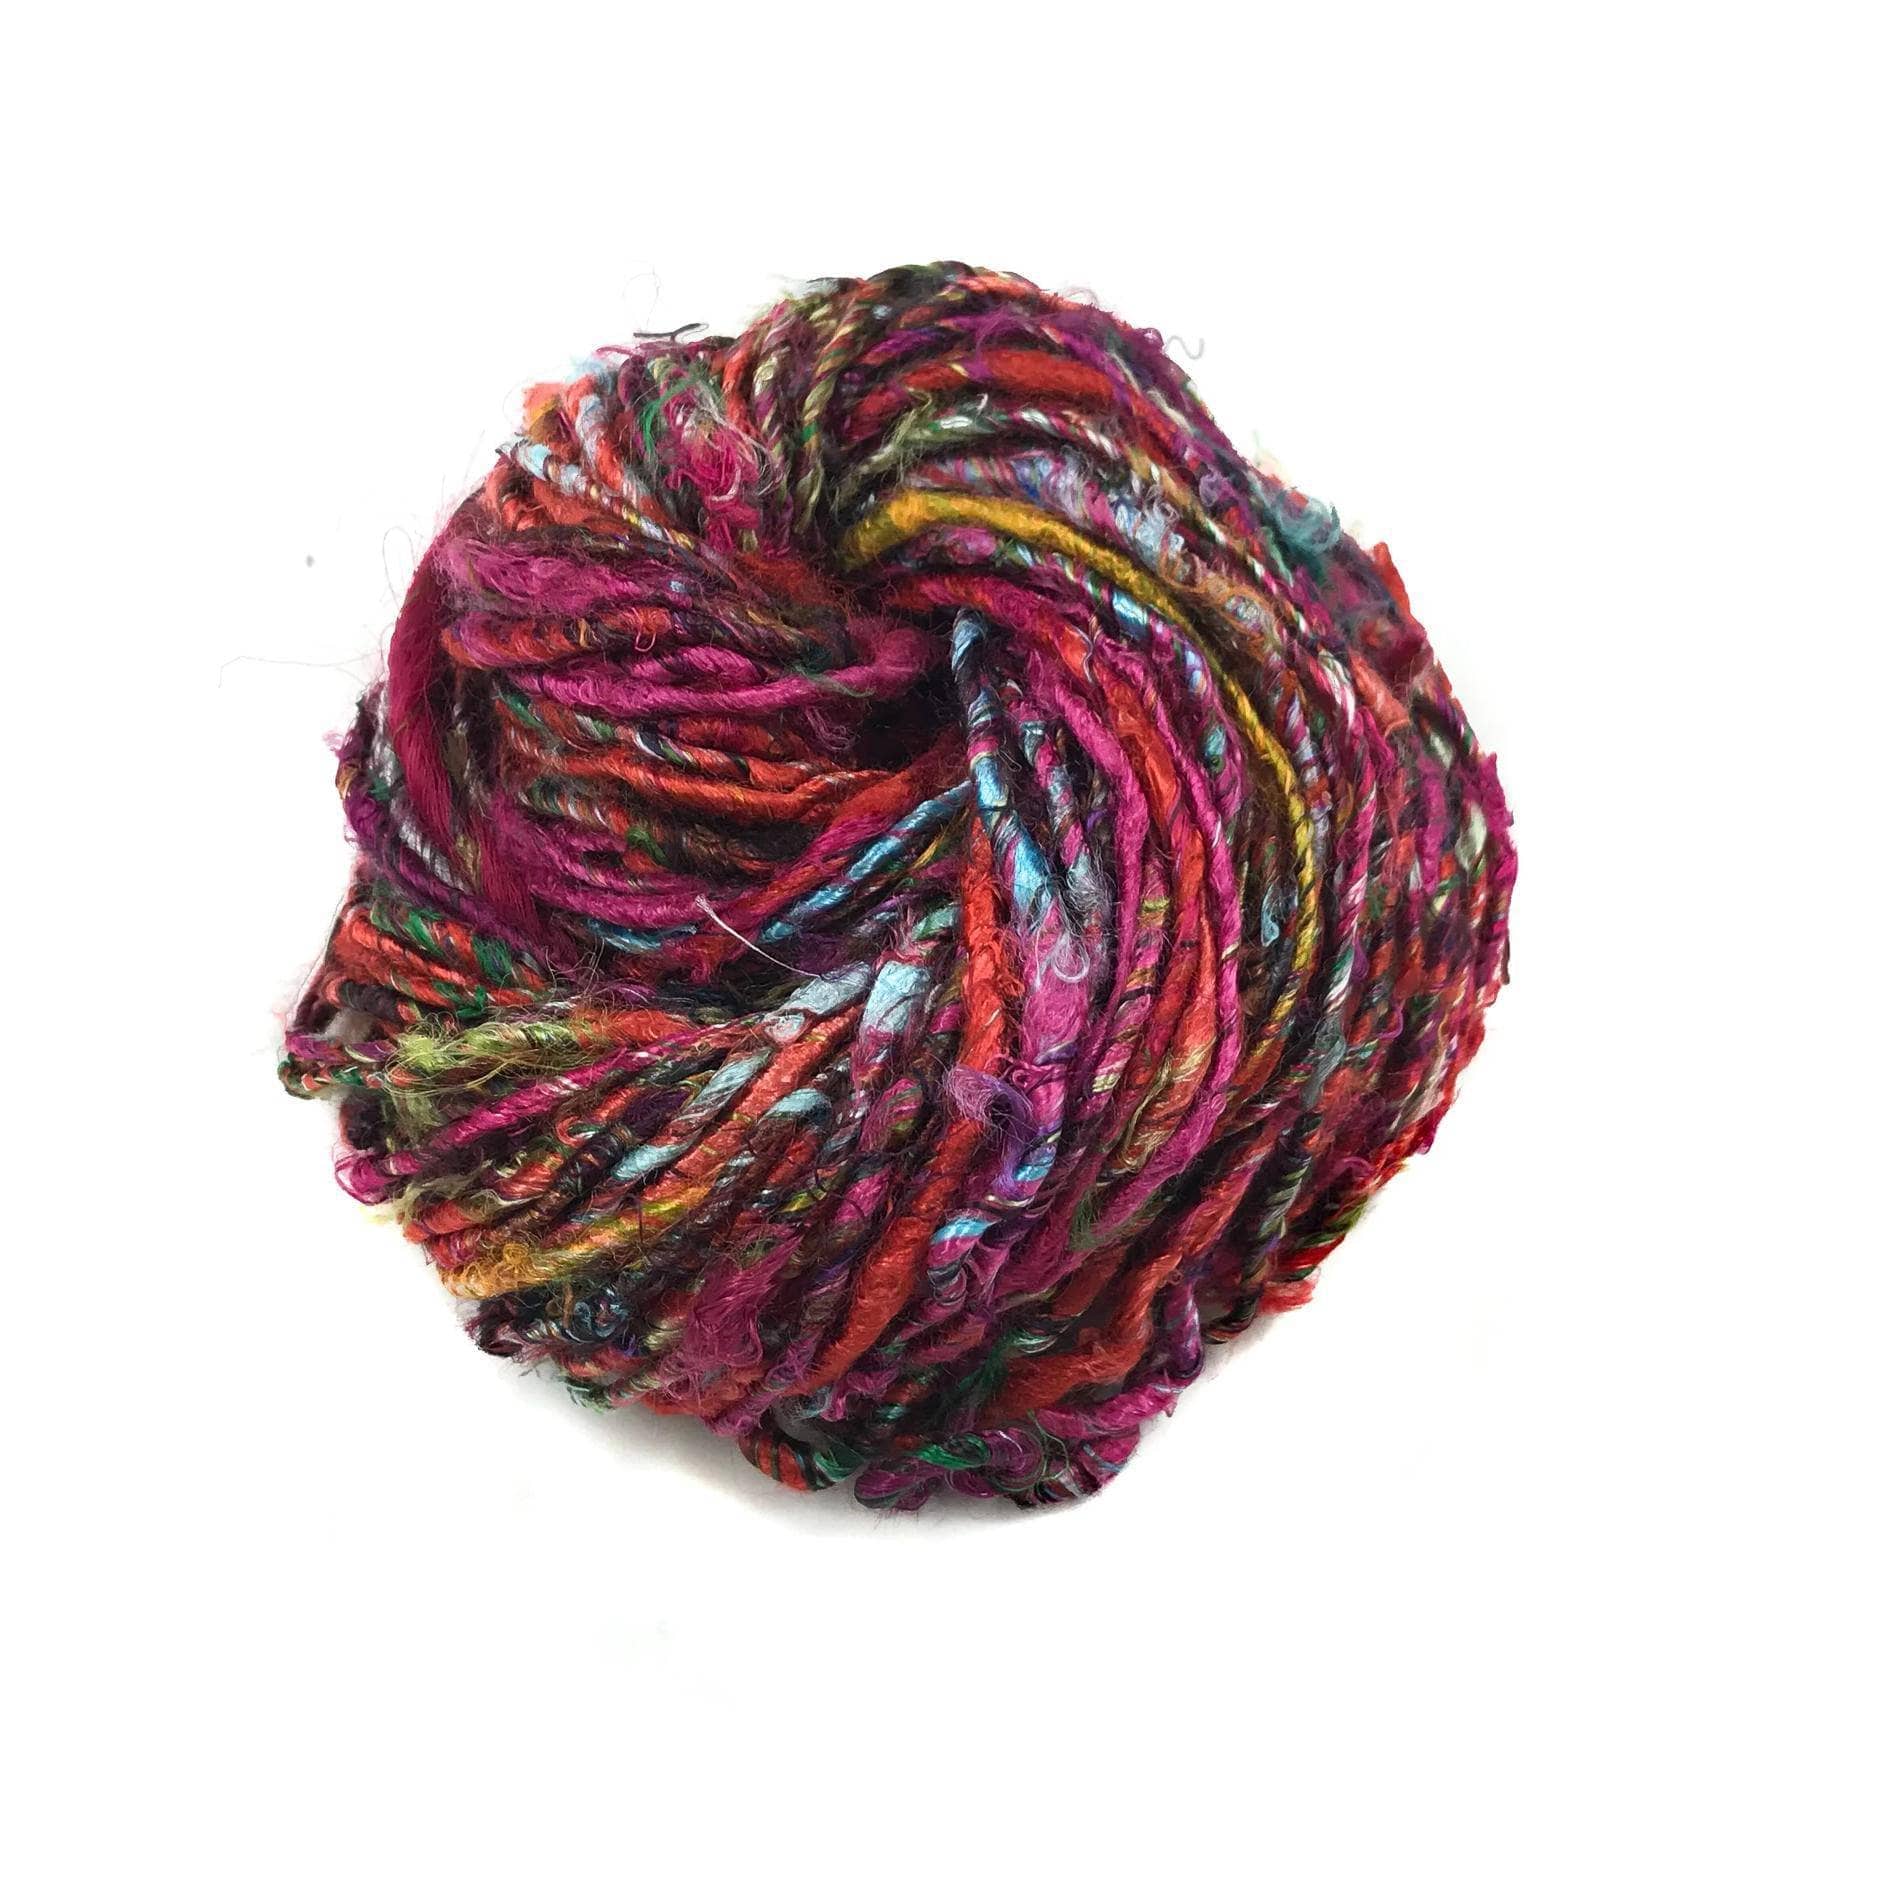 Top view of skein of Kaleidoscope banana fiber yarn curled into a birds nest shape in front of a white background.